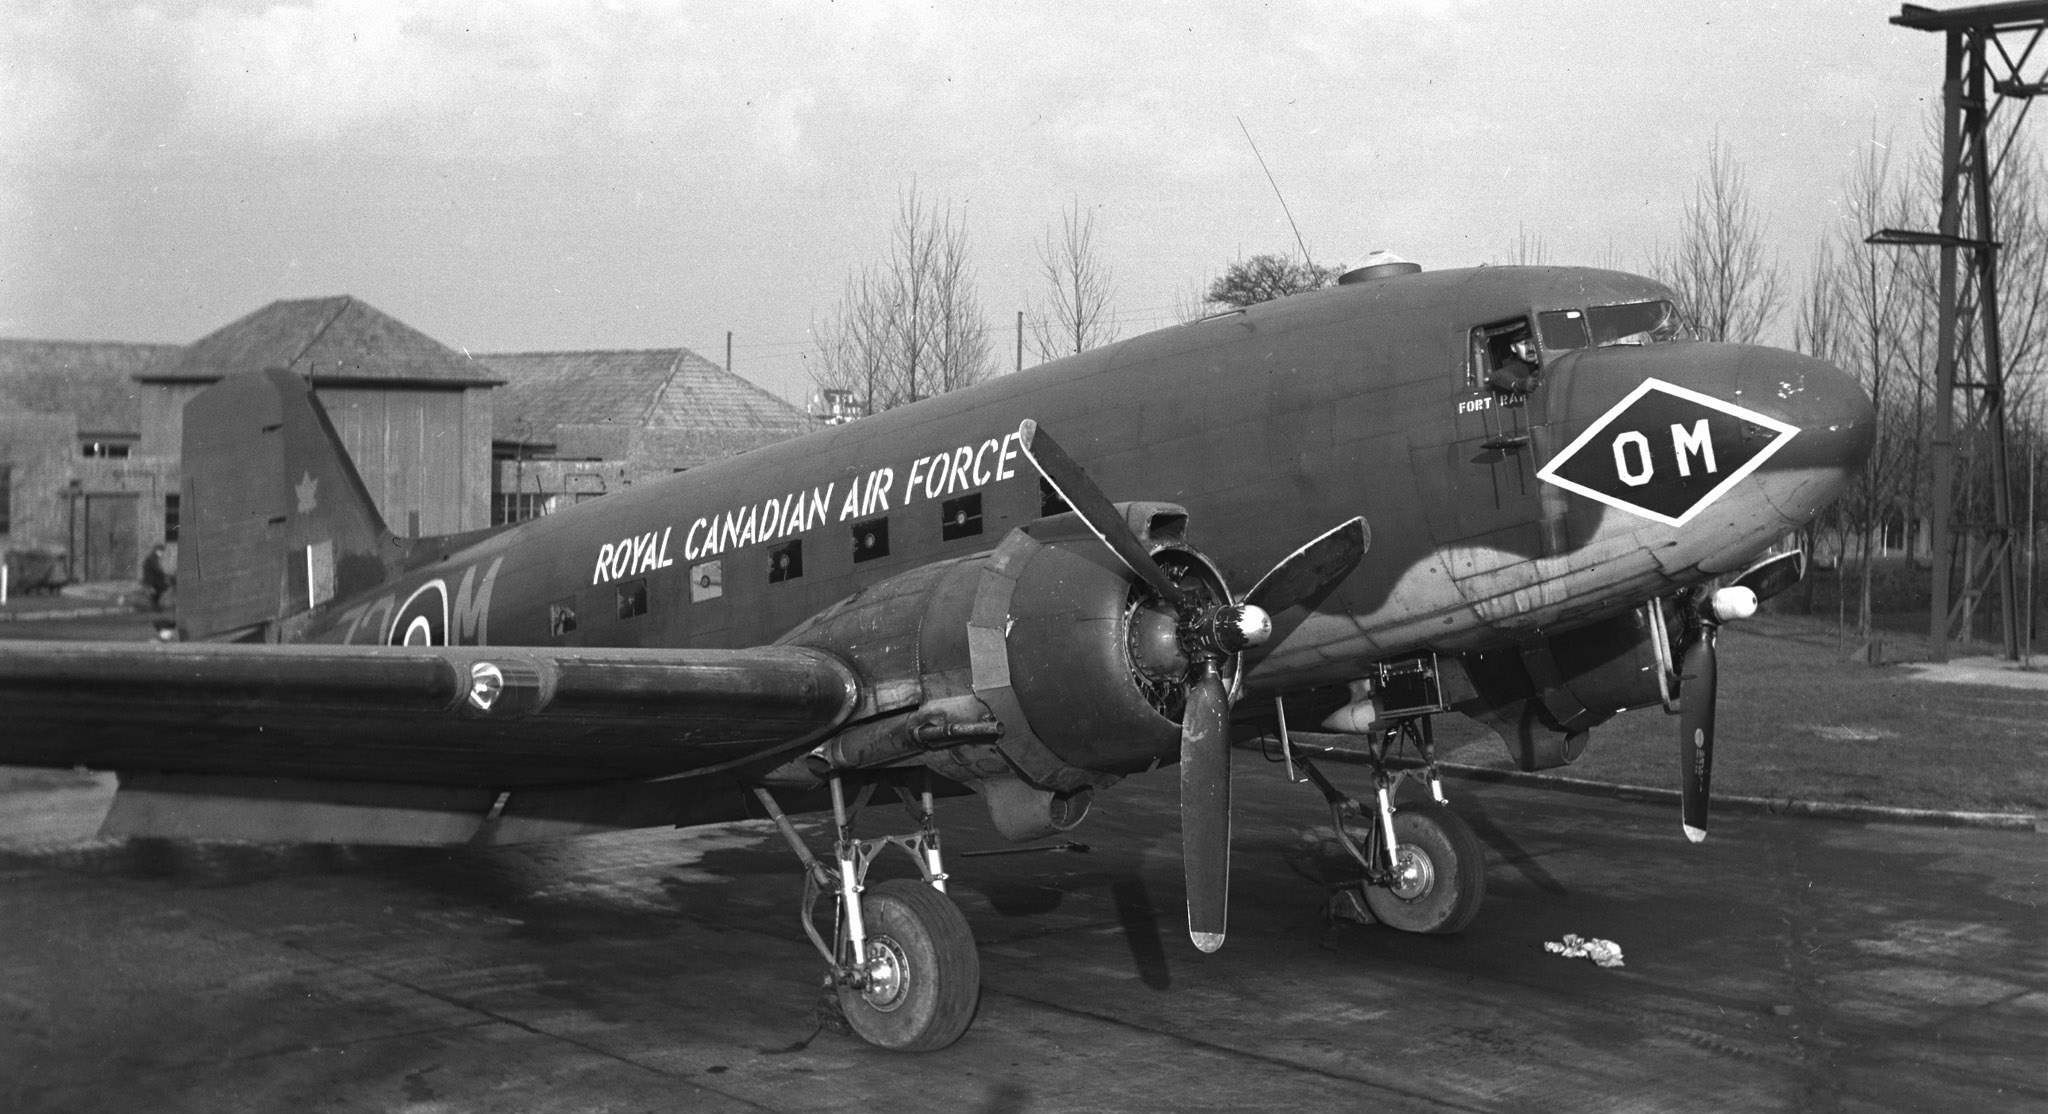 A large propeller driven aircraft rests on the tarmac. 